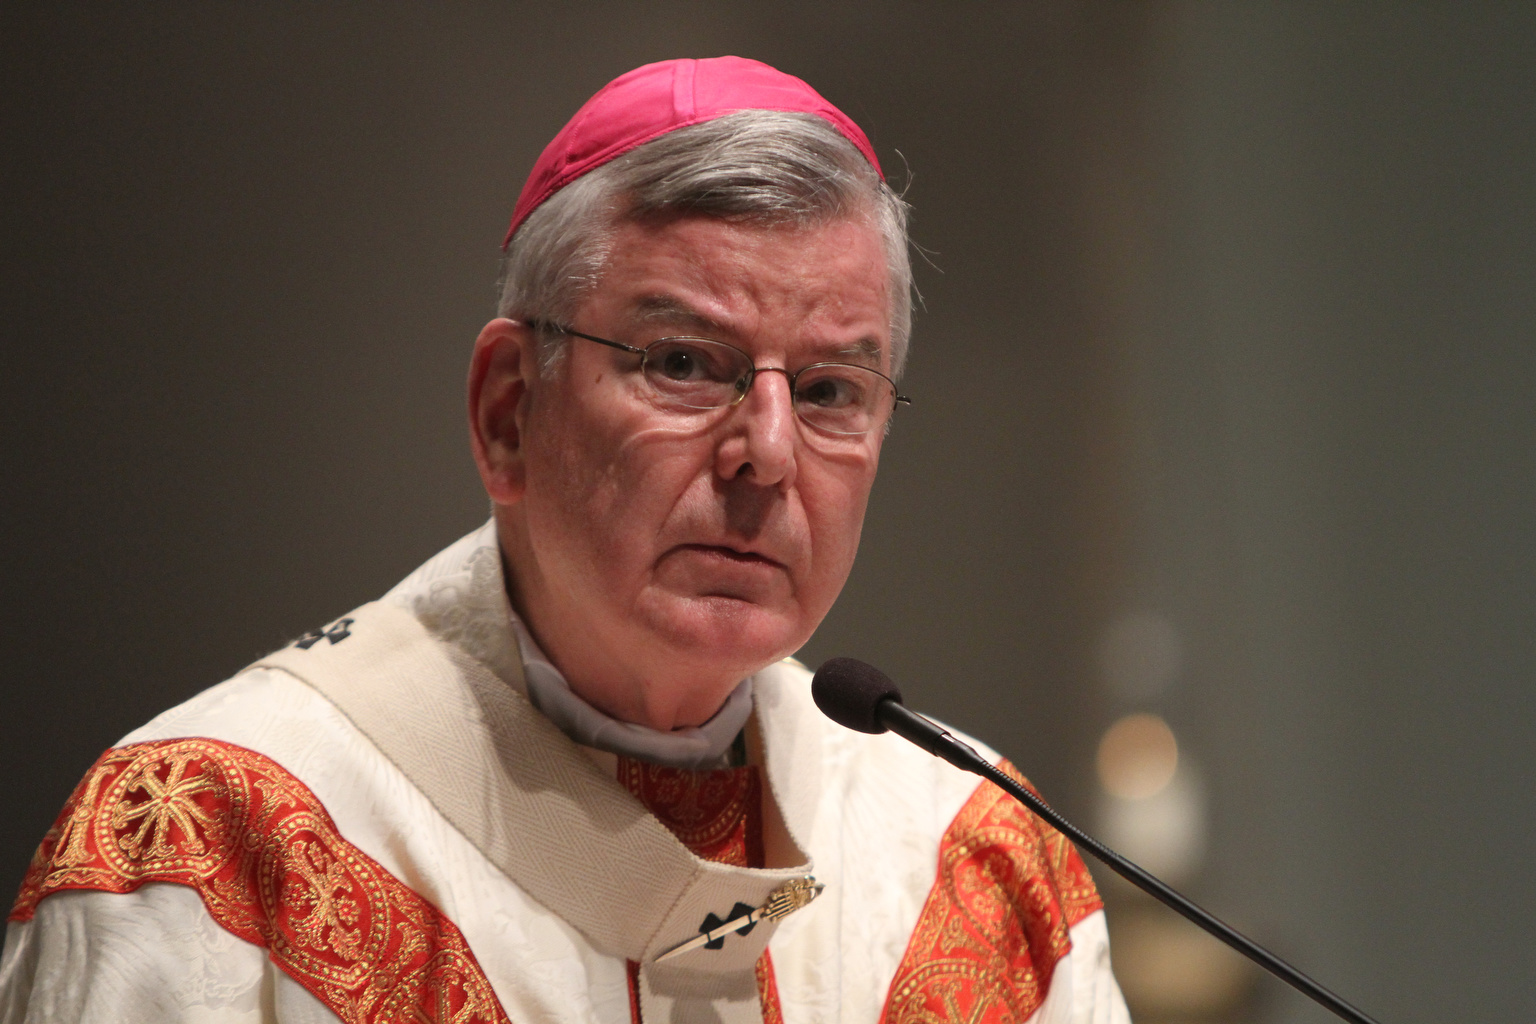 Former archbishop's ministry restricted in St Paul and Minneapolis